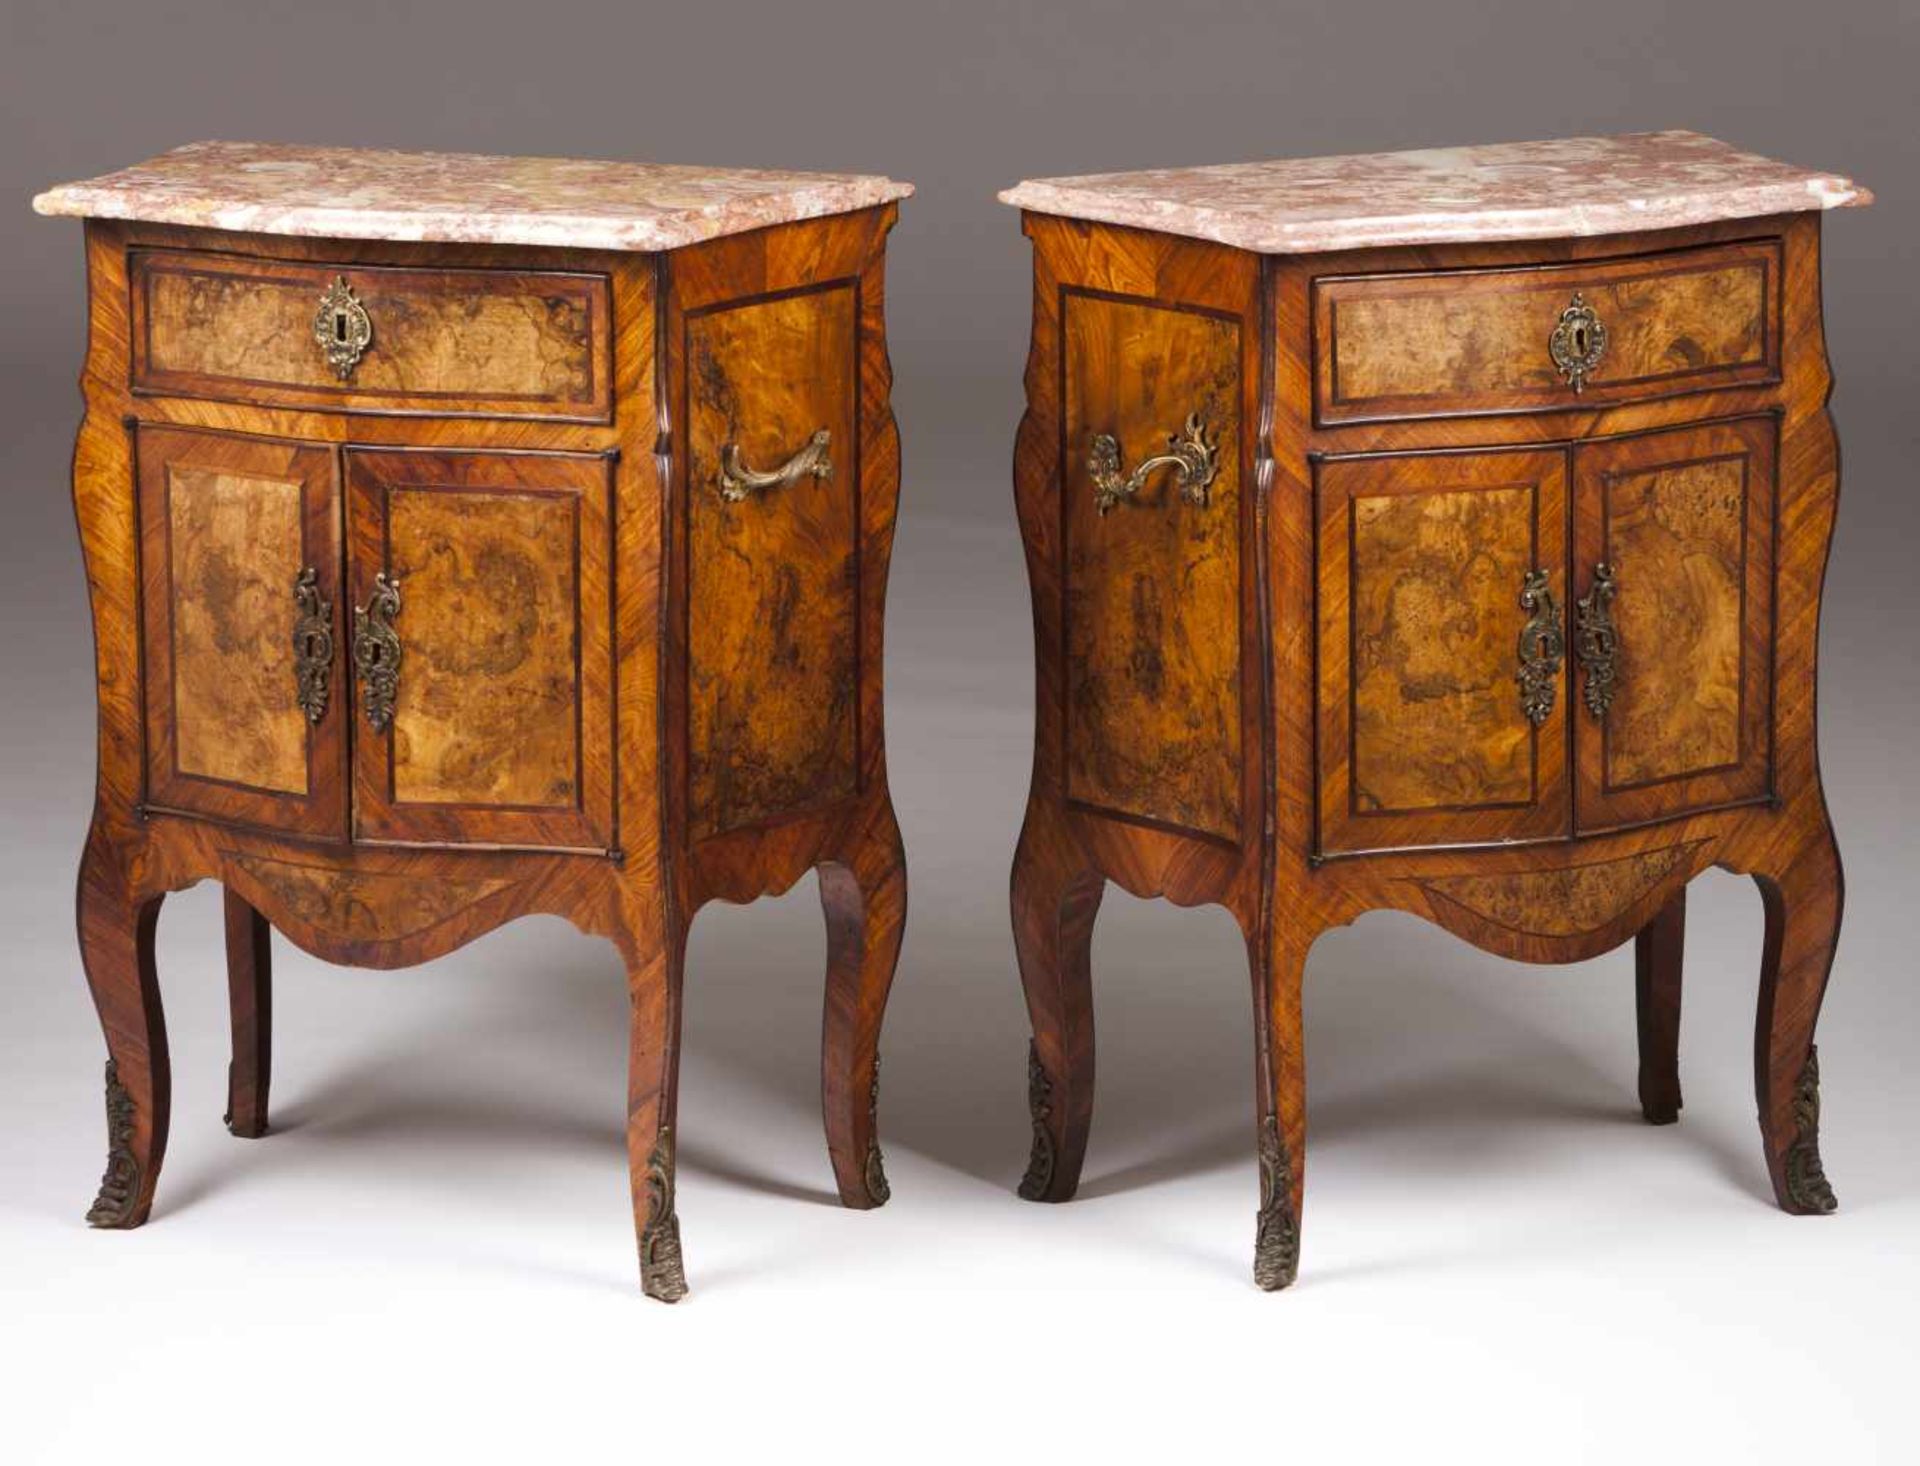 A pair of Louis XV style bedside tables